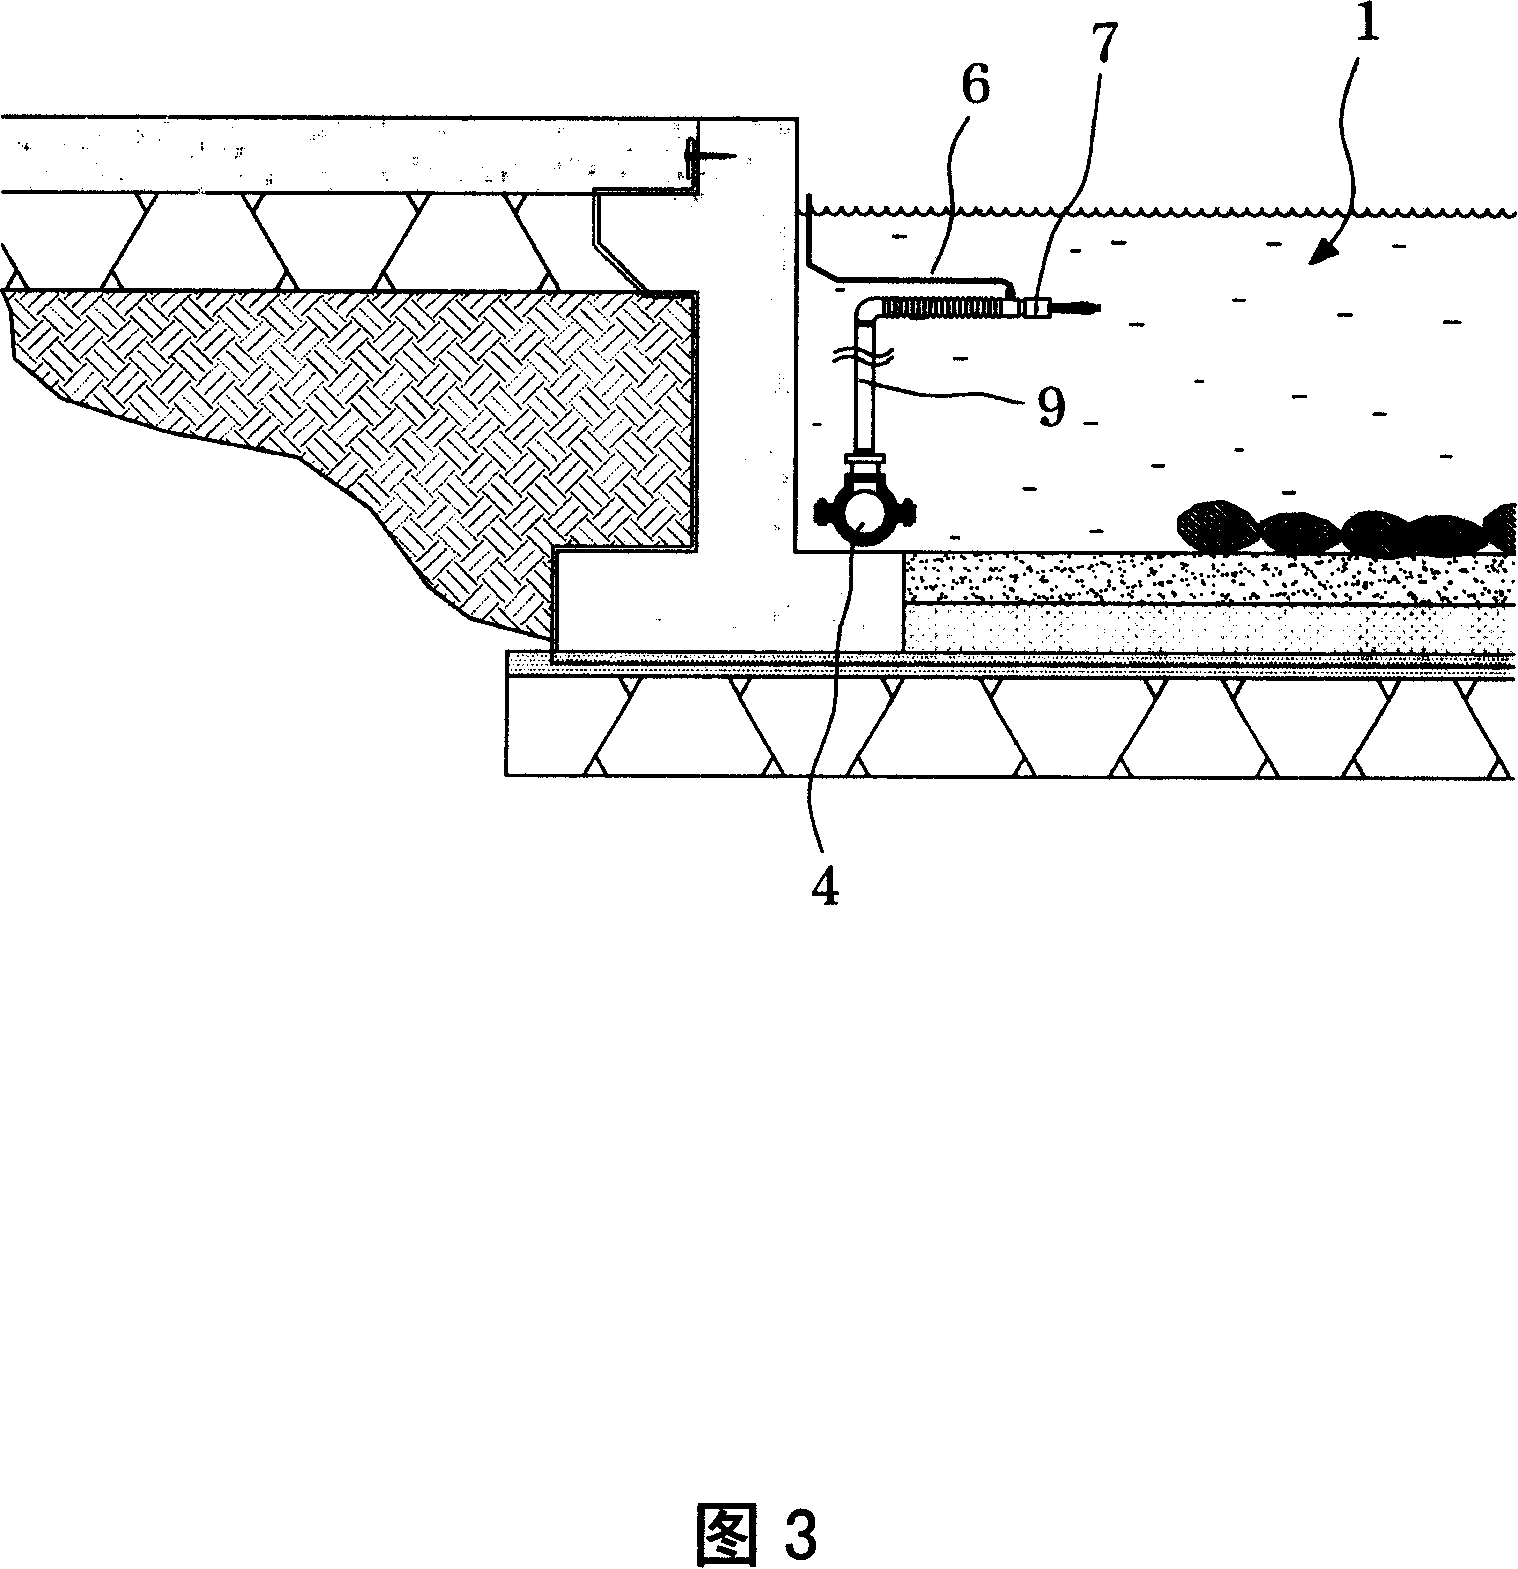 Pool purification system